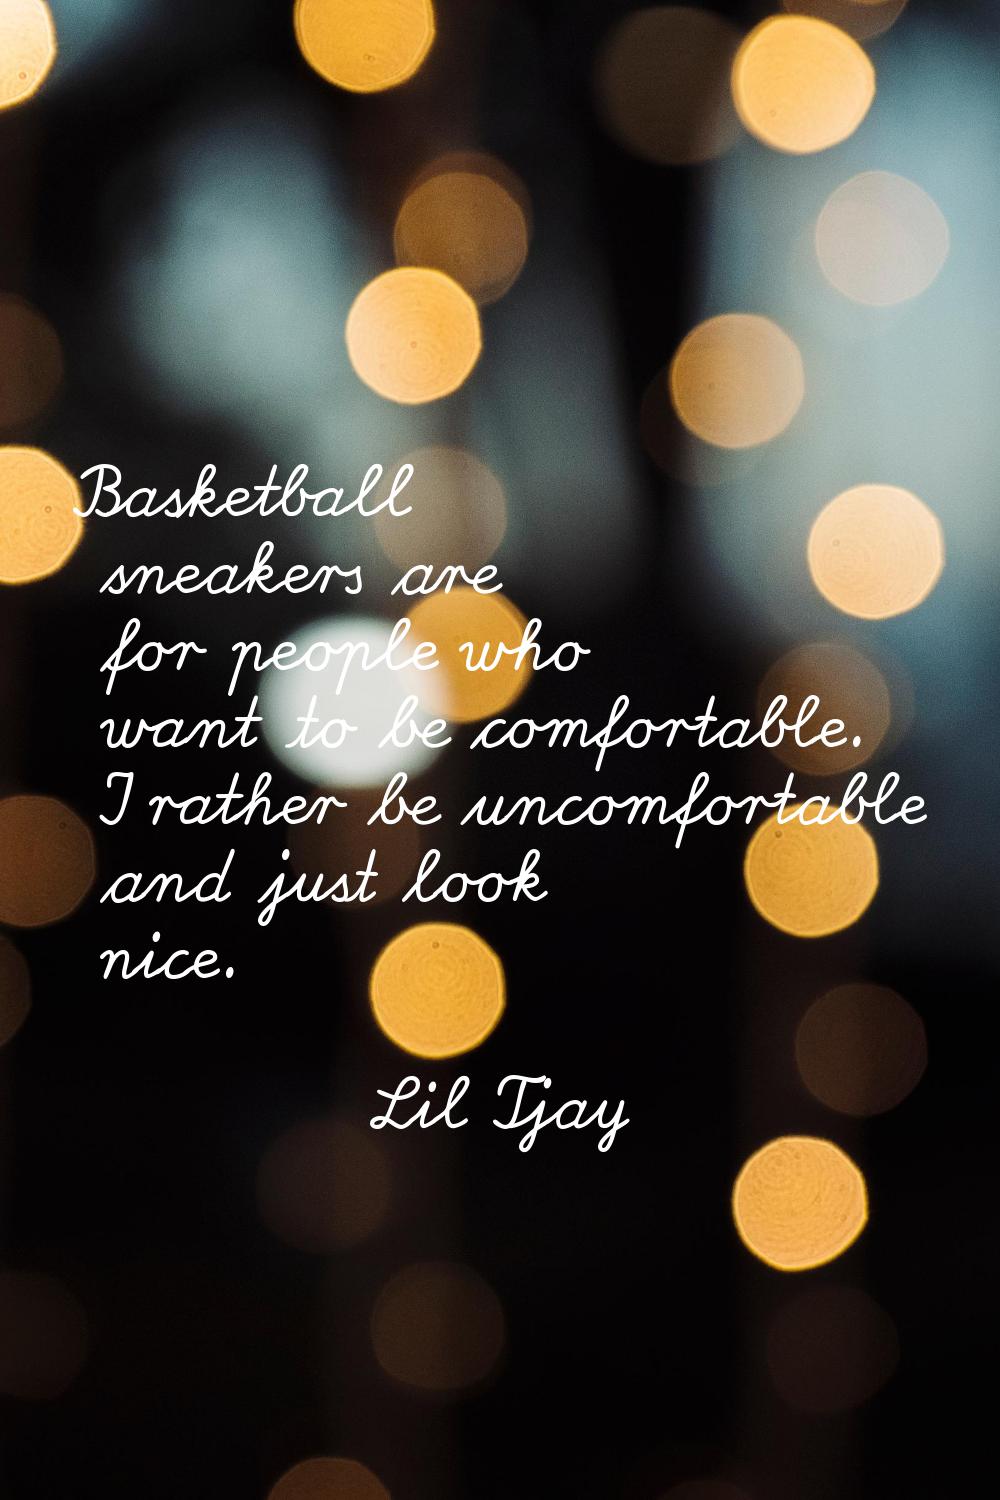 Basketball sneakers are for people who want to be comfortable. I rather be uncomfortable and just l